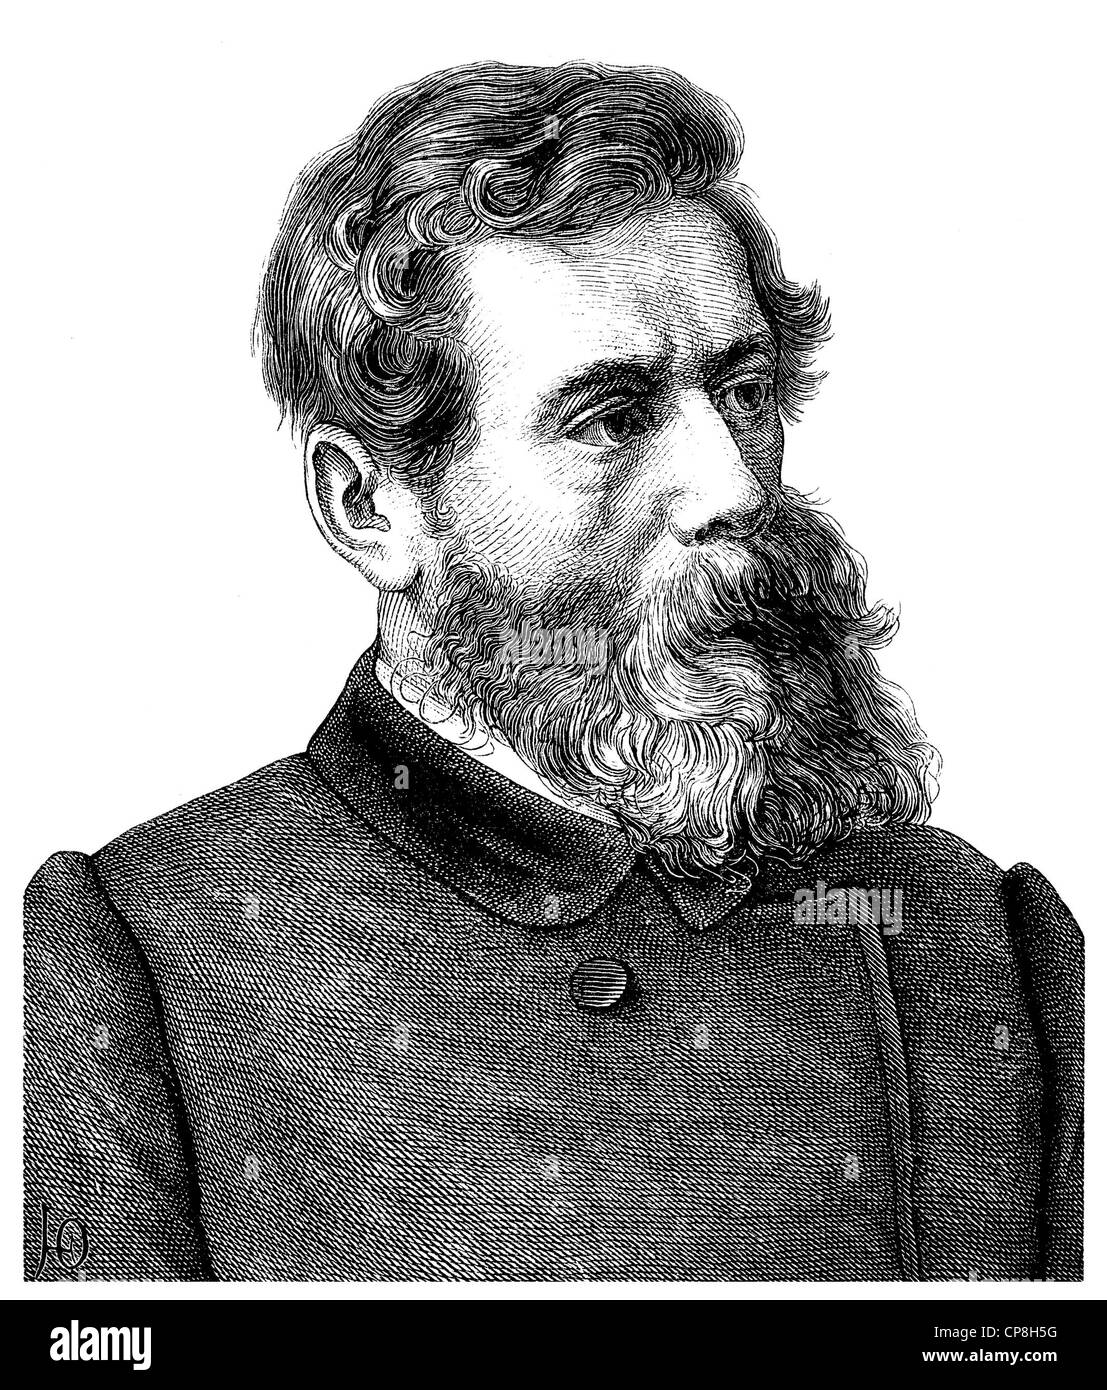 Ludwig Andreas Feuerbach, 1804 - 1872, a German philosopher and anthropologist, Historische Zeichnung - ludwig-andreas-feuerbach-1804-1872-a-german-philosopher-and-anthropologist-CP8H5G